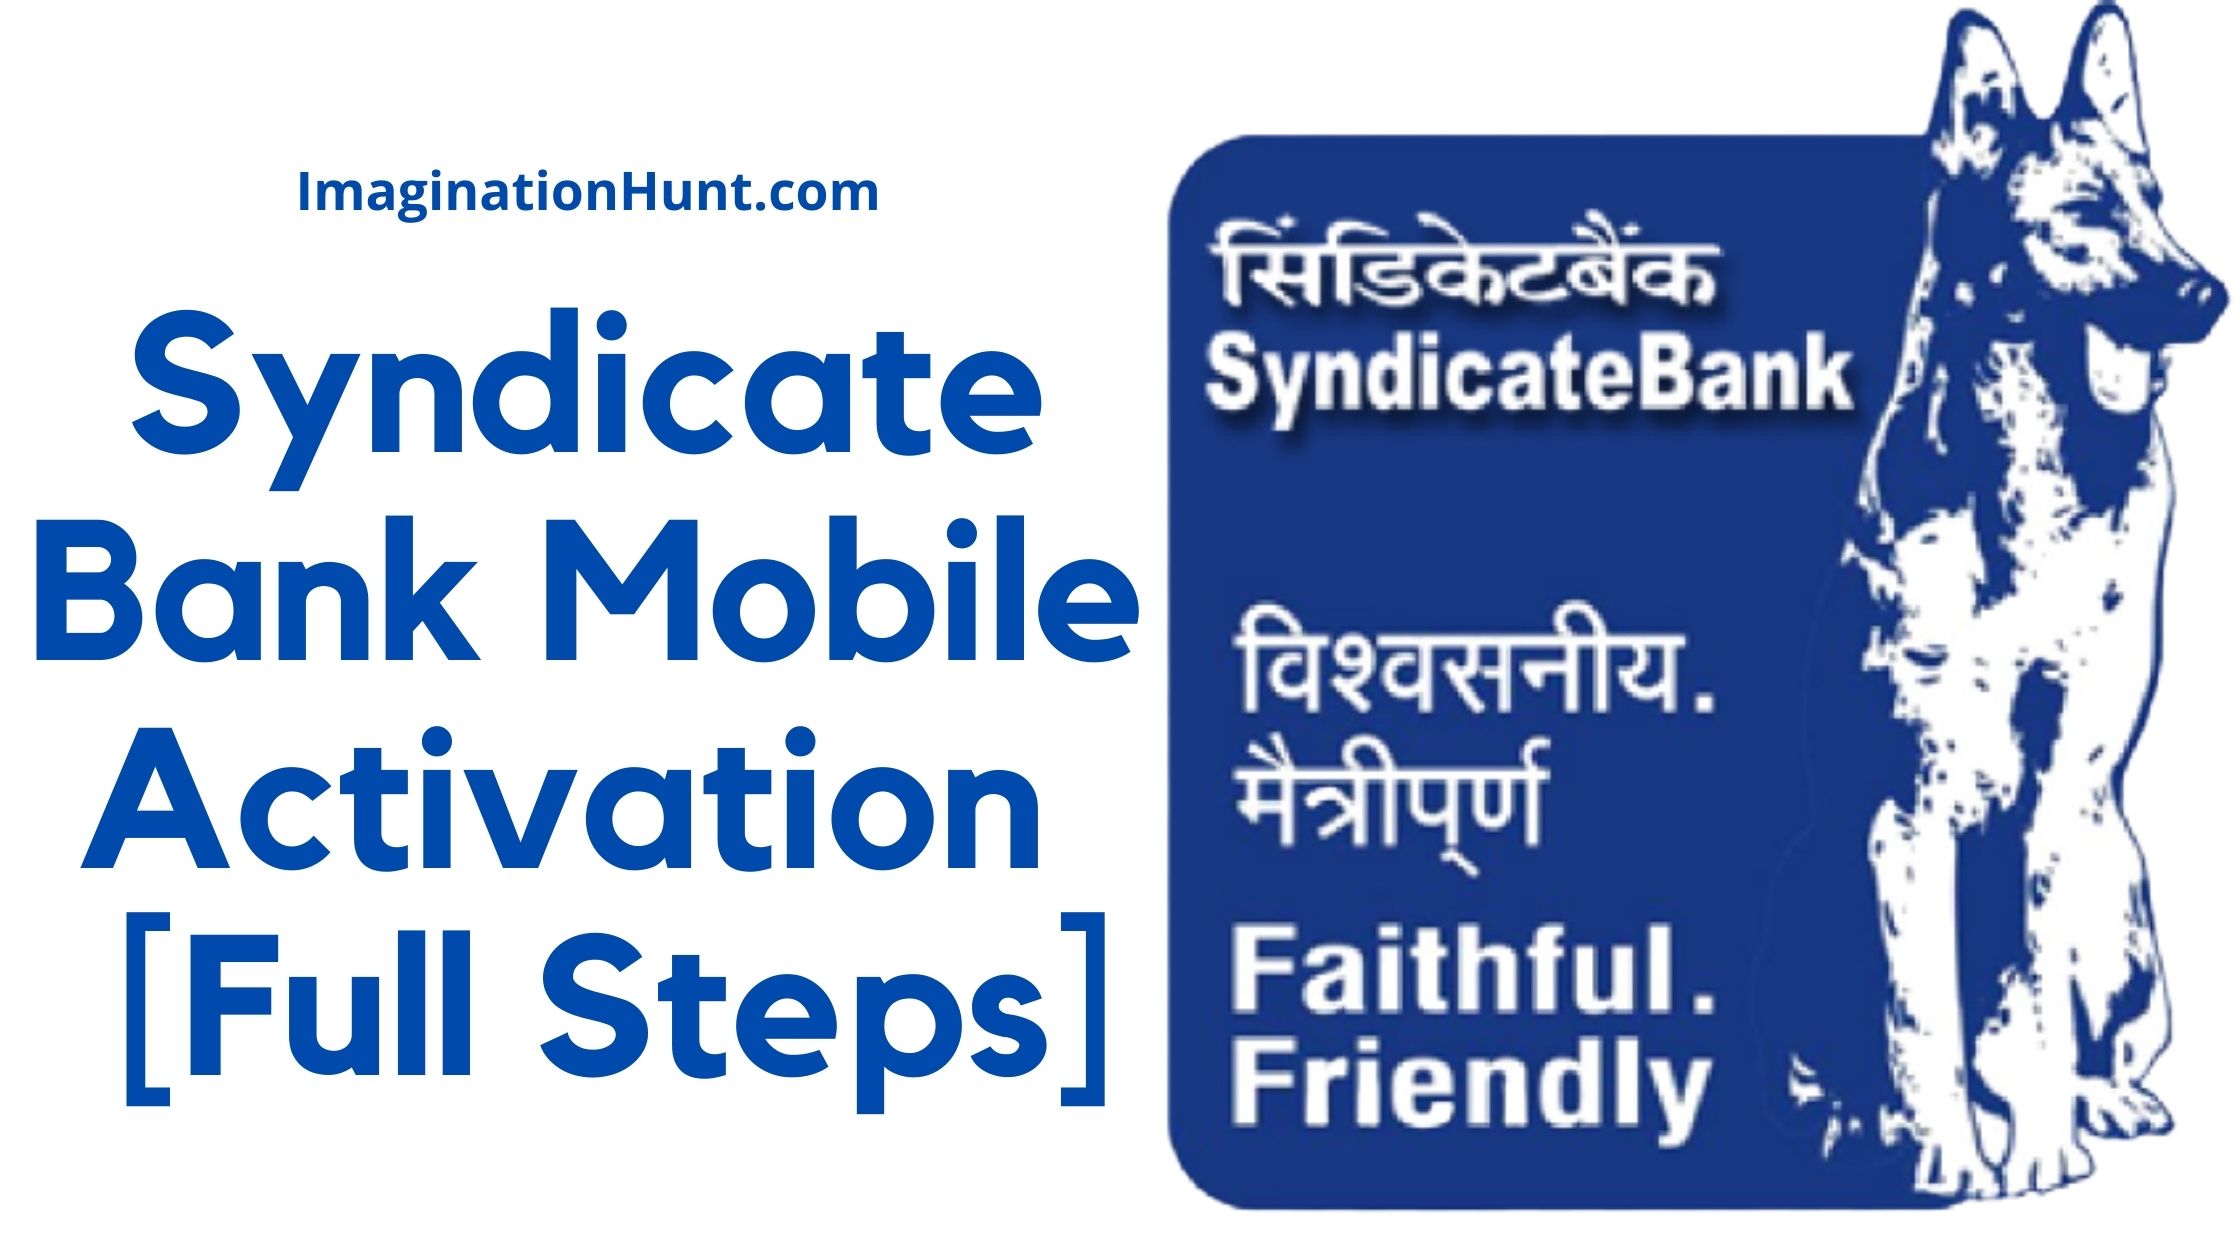 Syndicate Bank Mobile Activation